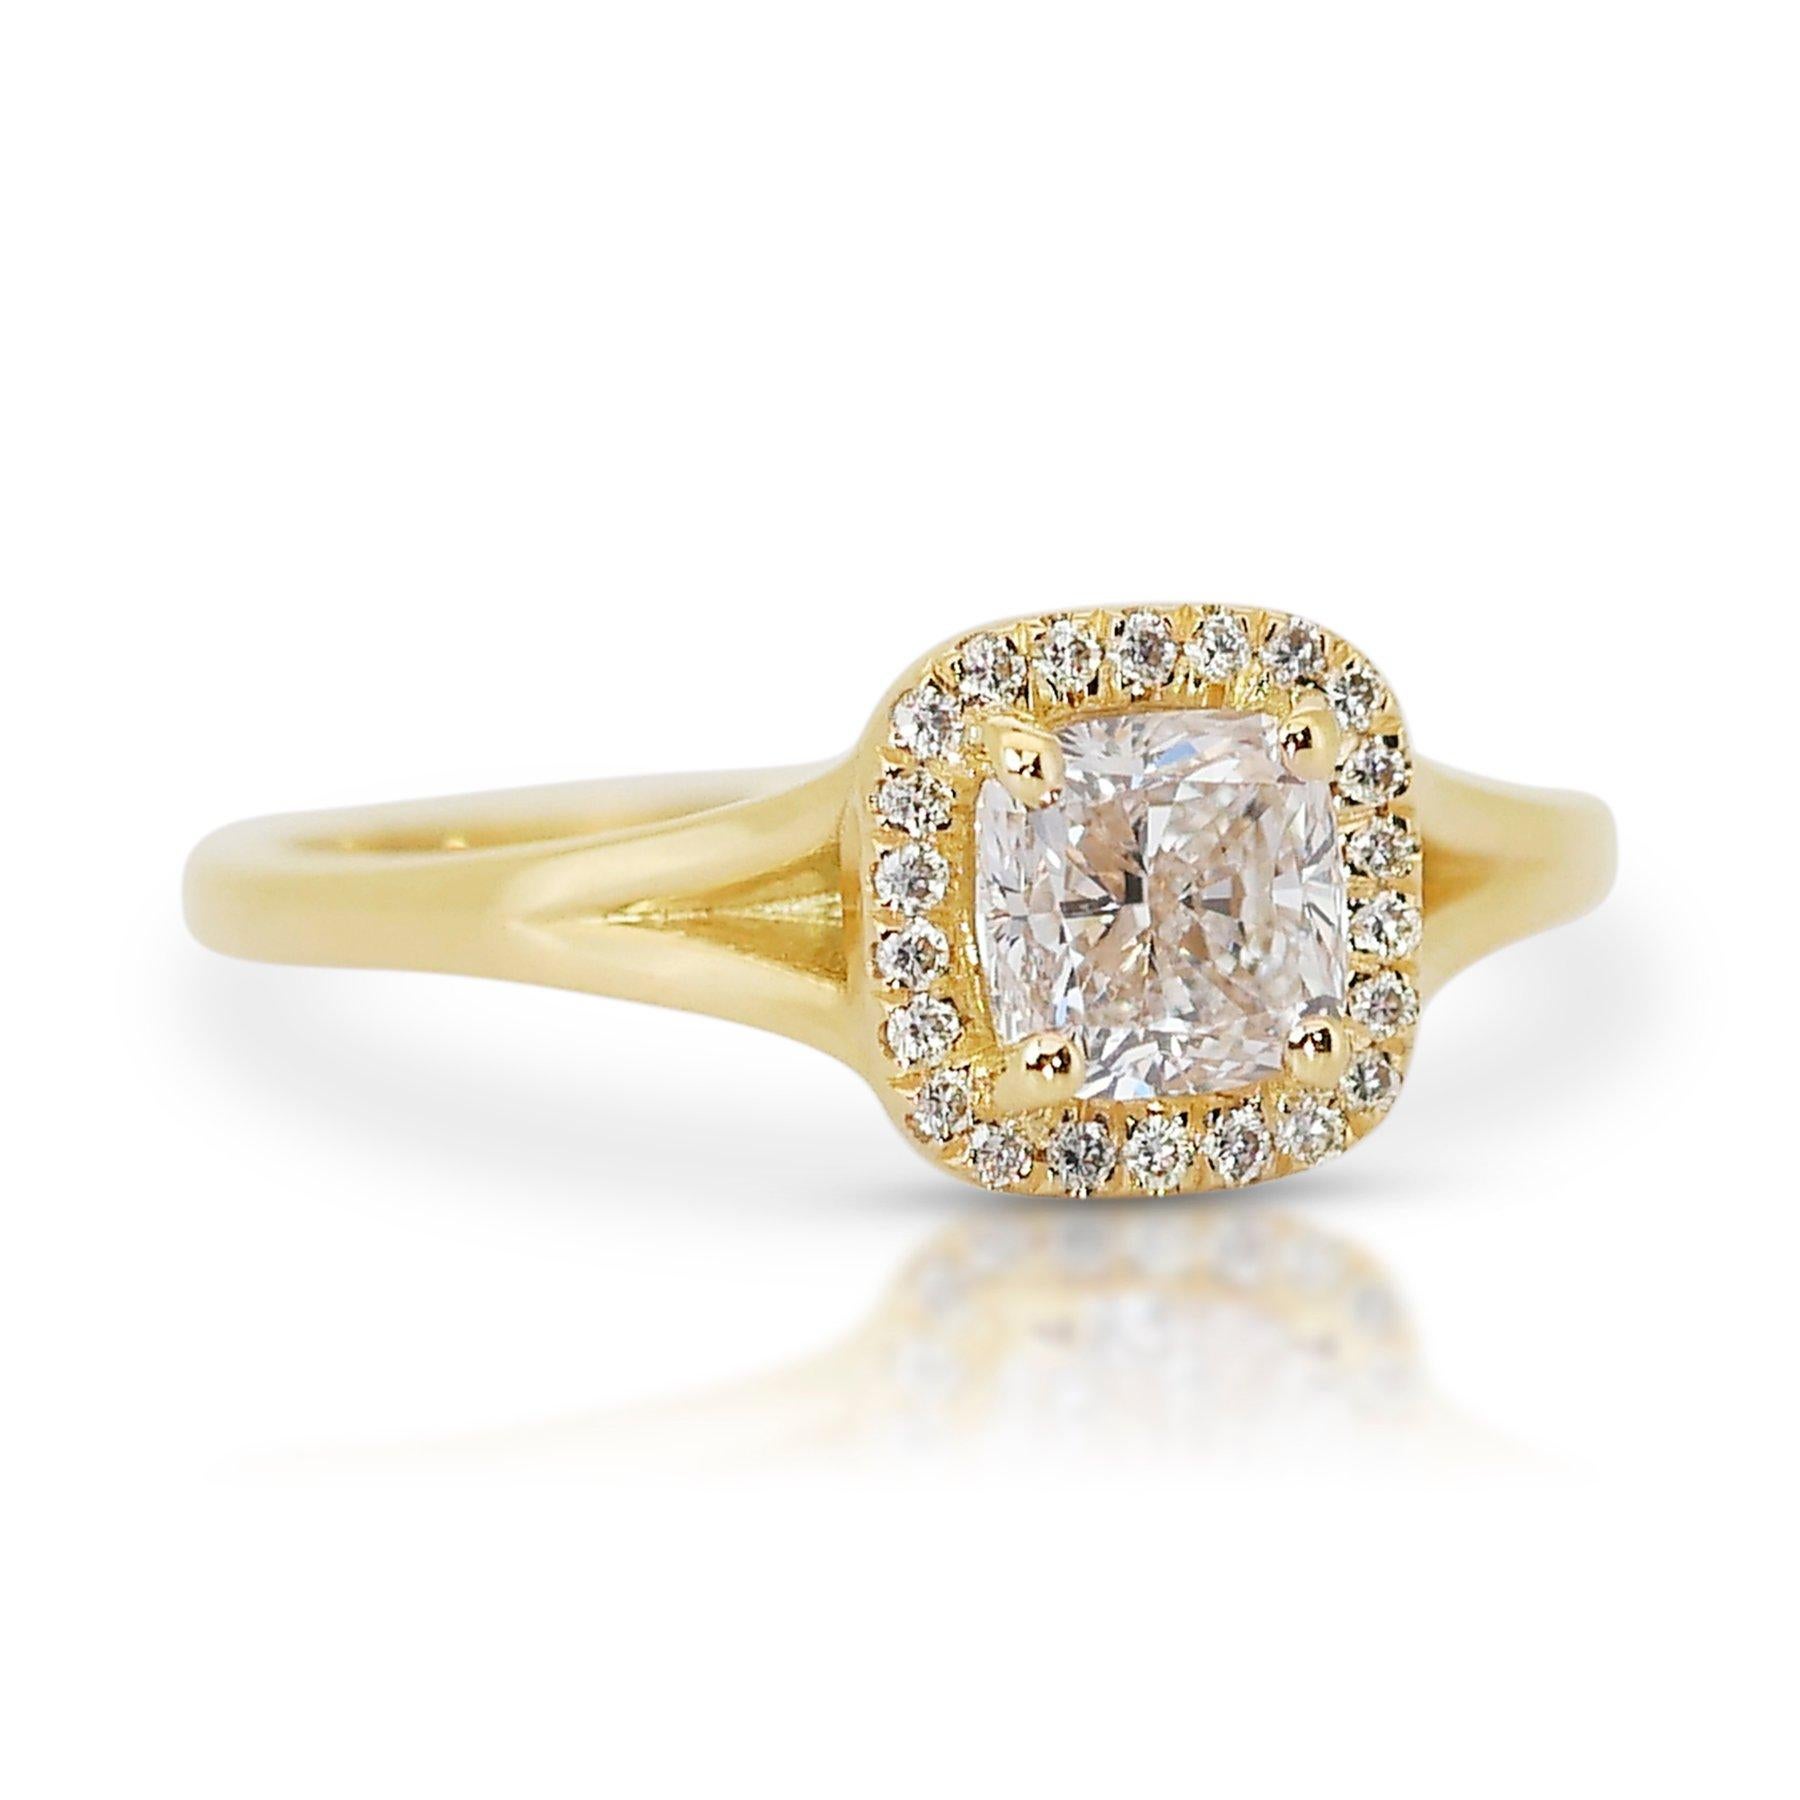 Sparkling 1.63ct Diamond Halo Ring in 18k Yellow Gold - GIA Certified

Embrace the timeless beauty of this exquisite 18k yellow gold ring, highlighted by a magnificent 1.50-carat cushion-cut diamond. Adding to its brilliance, 22 round side diamonds,